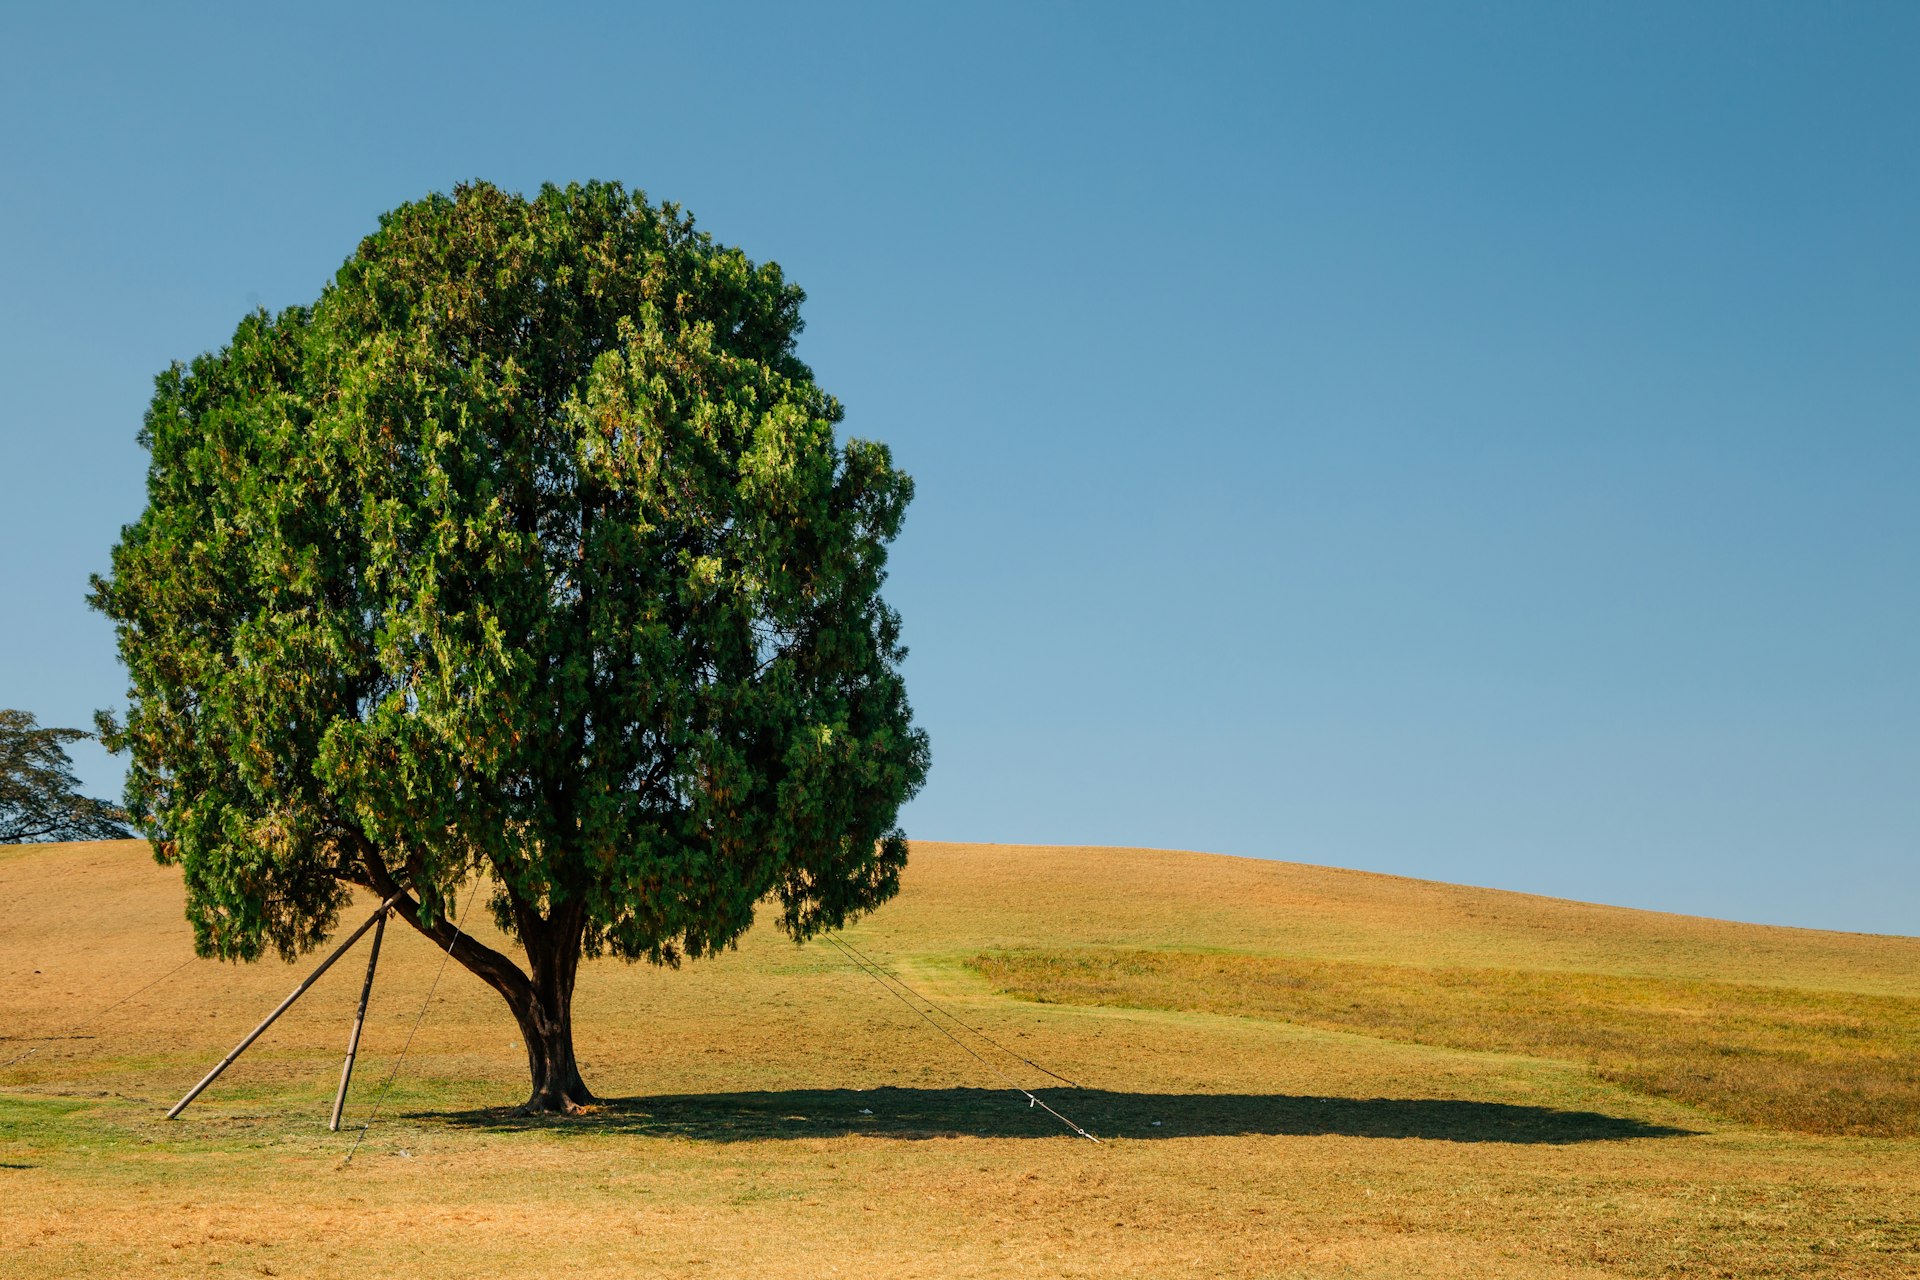 One Tree Hill: A single tree on a brown field in Olympic Park, Seoul, South Korea